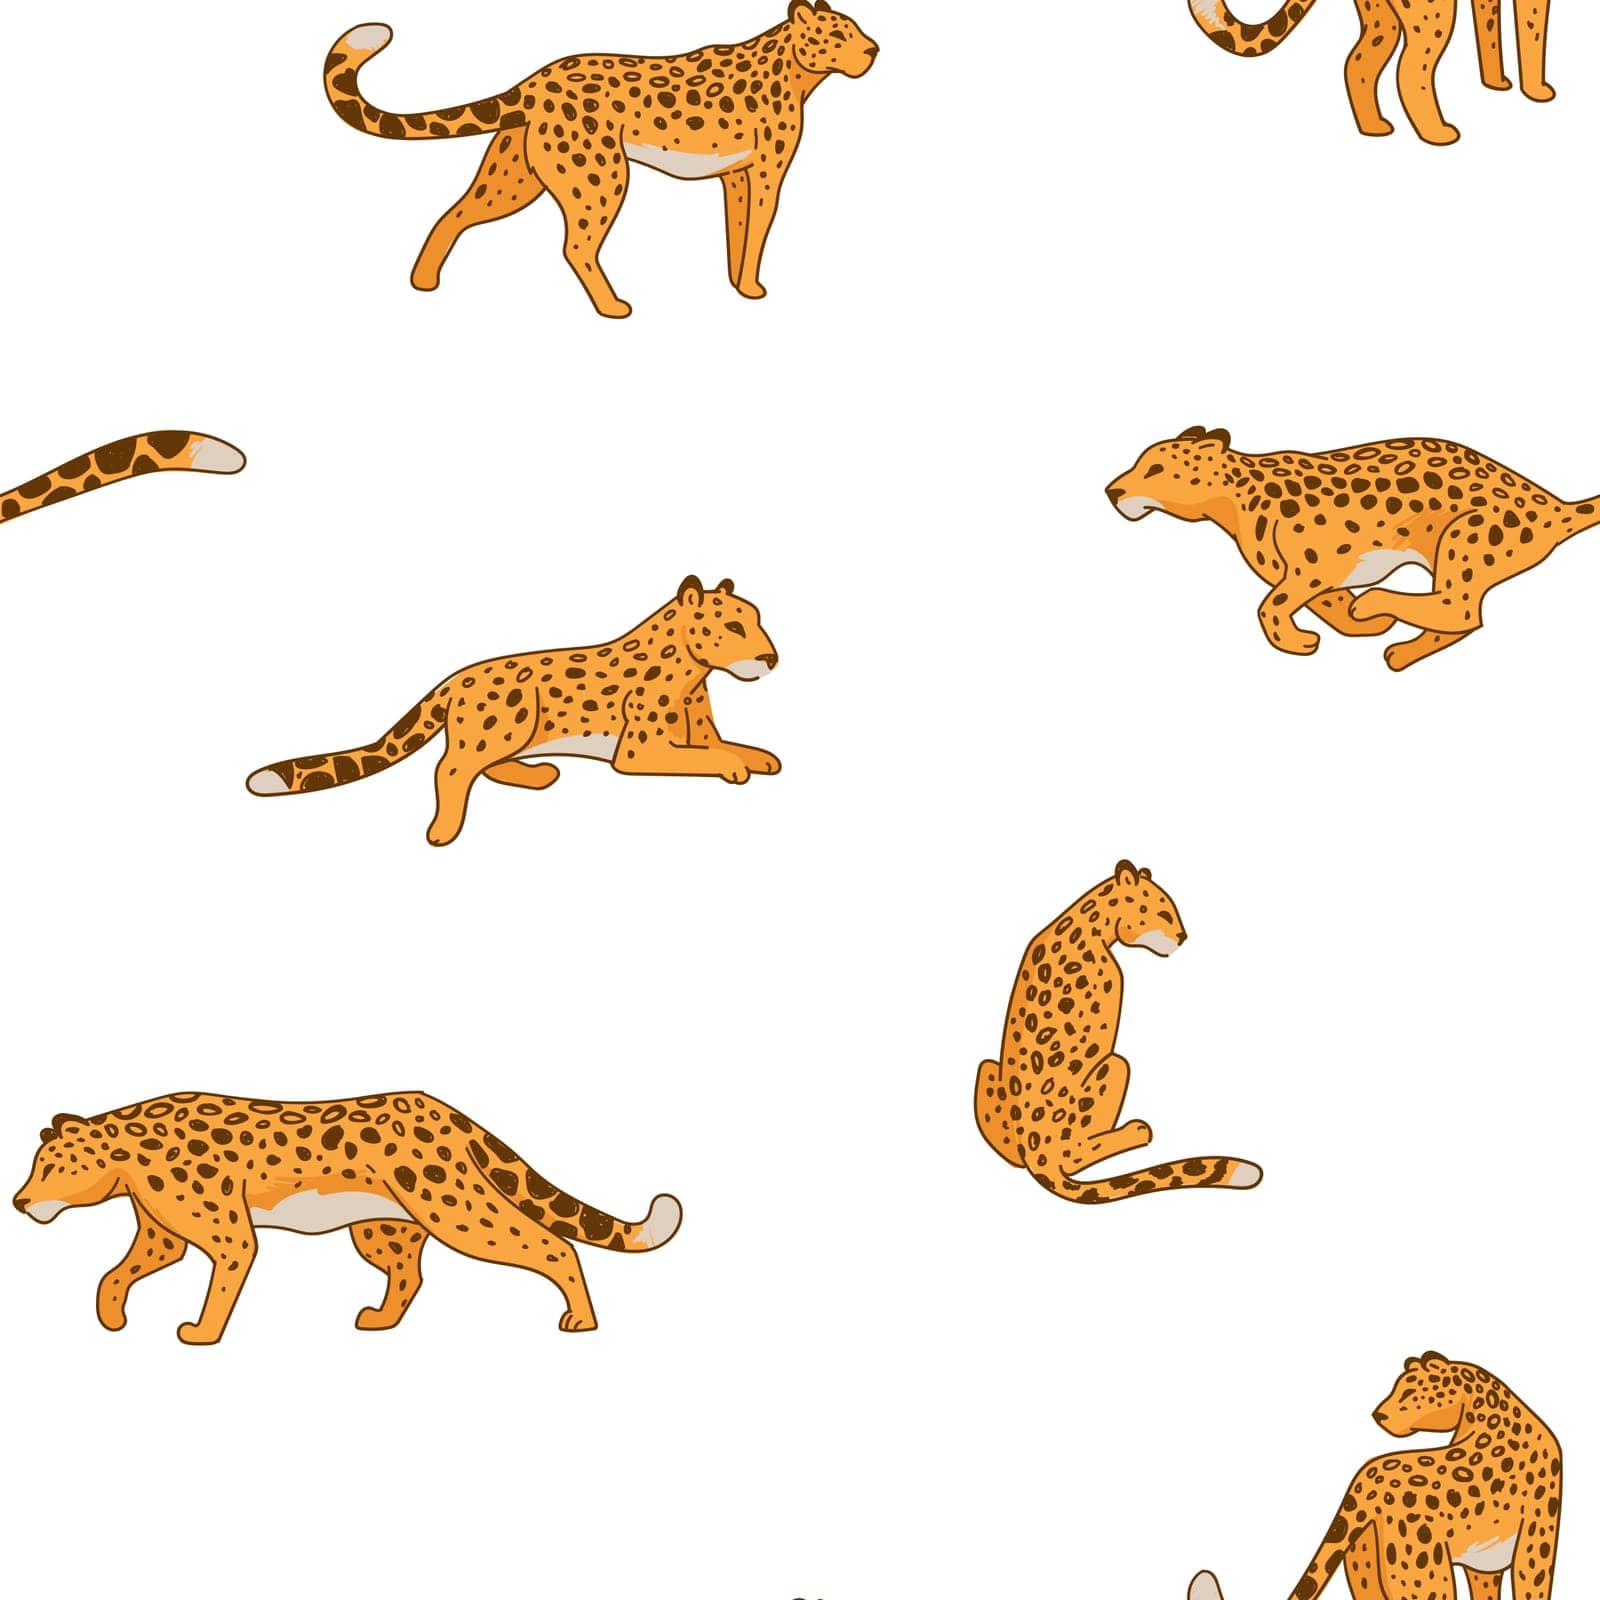 Leopard or cheetah animal running and laying, motion and calmness of mammal. Seamless pattern of predator, spotted predator, wilderness and hunting and resting feline cat. Vector in flat style